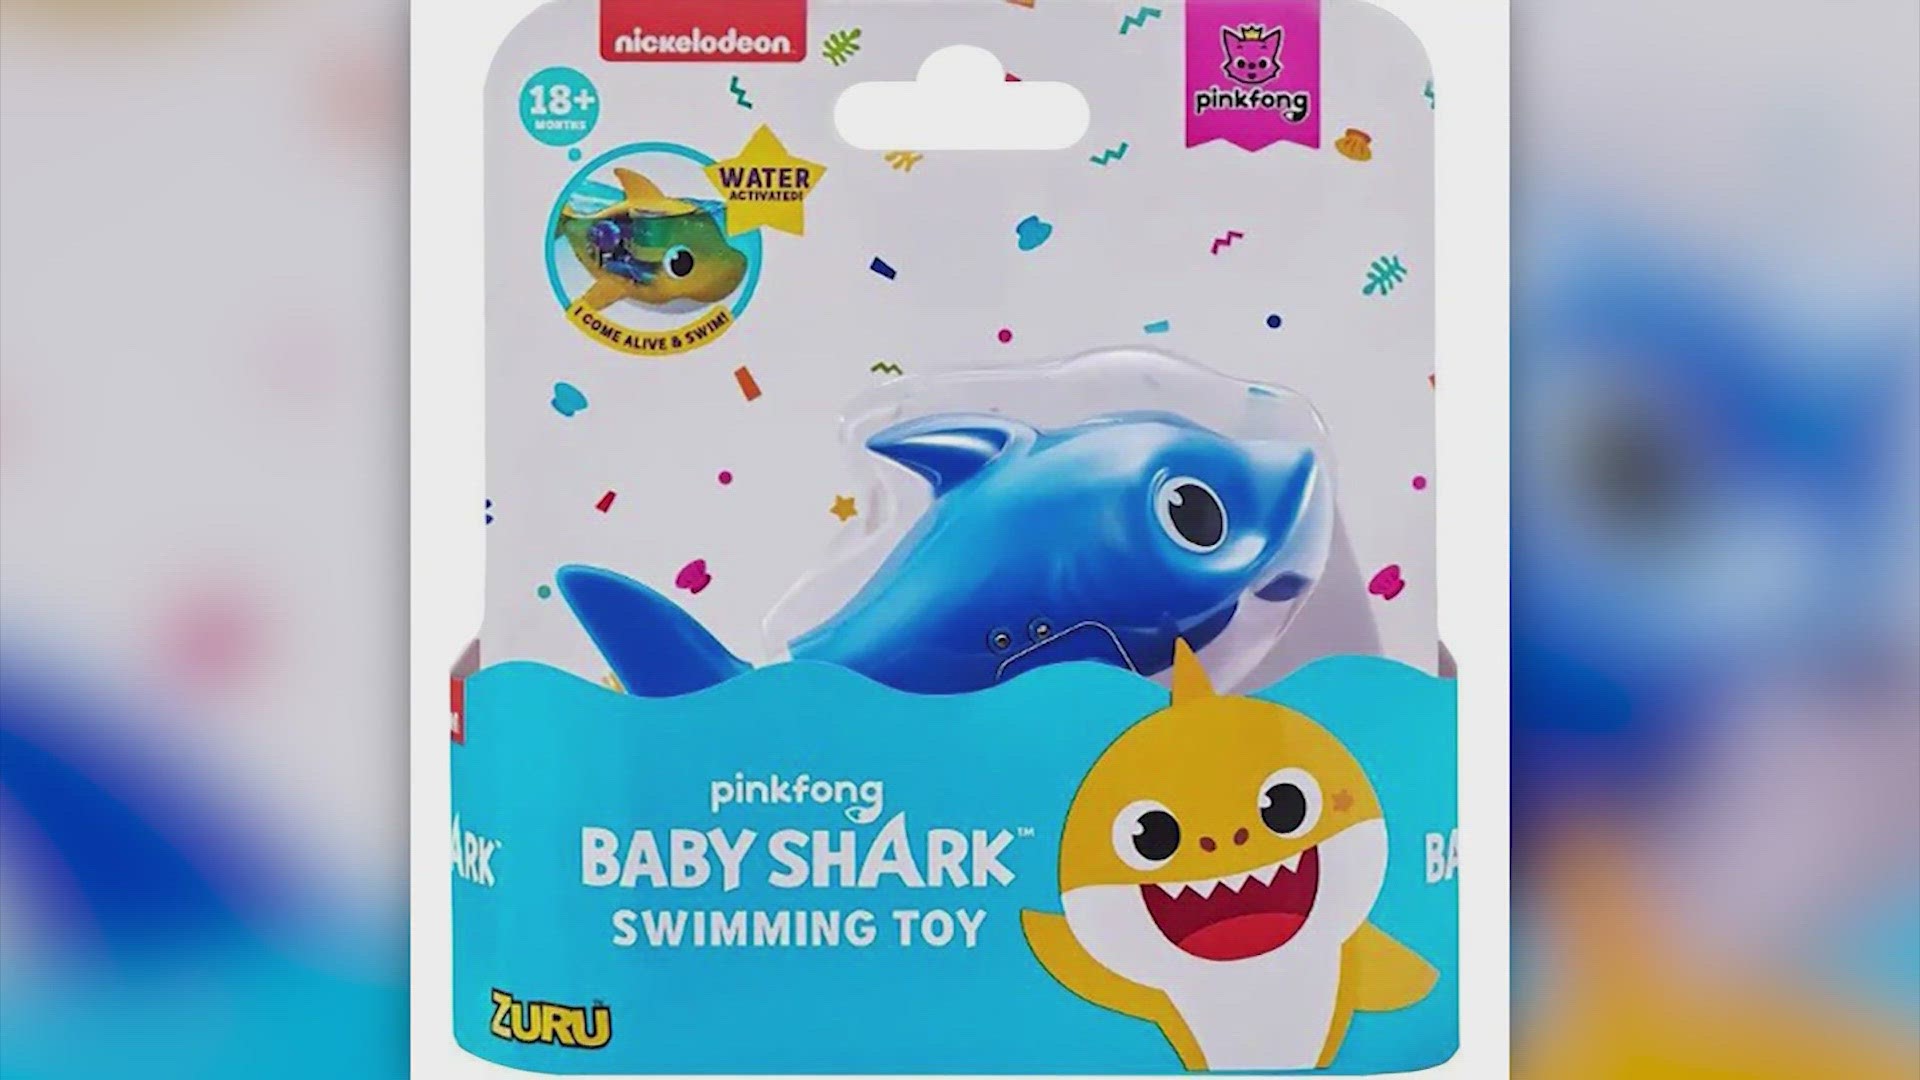 The recalled Baby Shark water toys were sold at several major retailers including Walmart, Target, CVS, Walgreens, Dollar General and more.